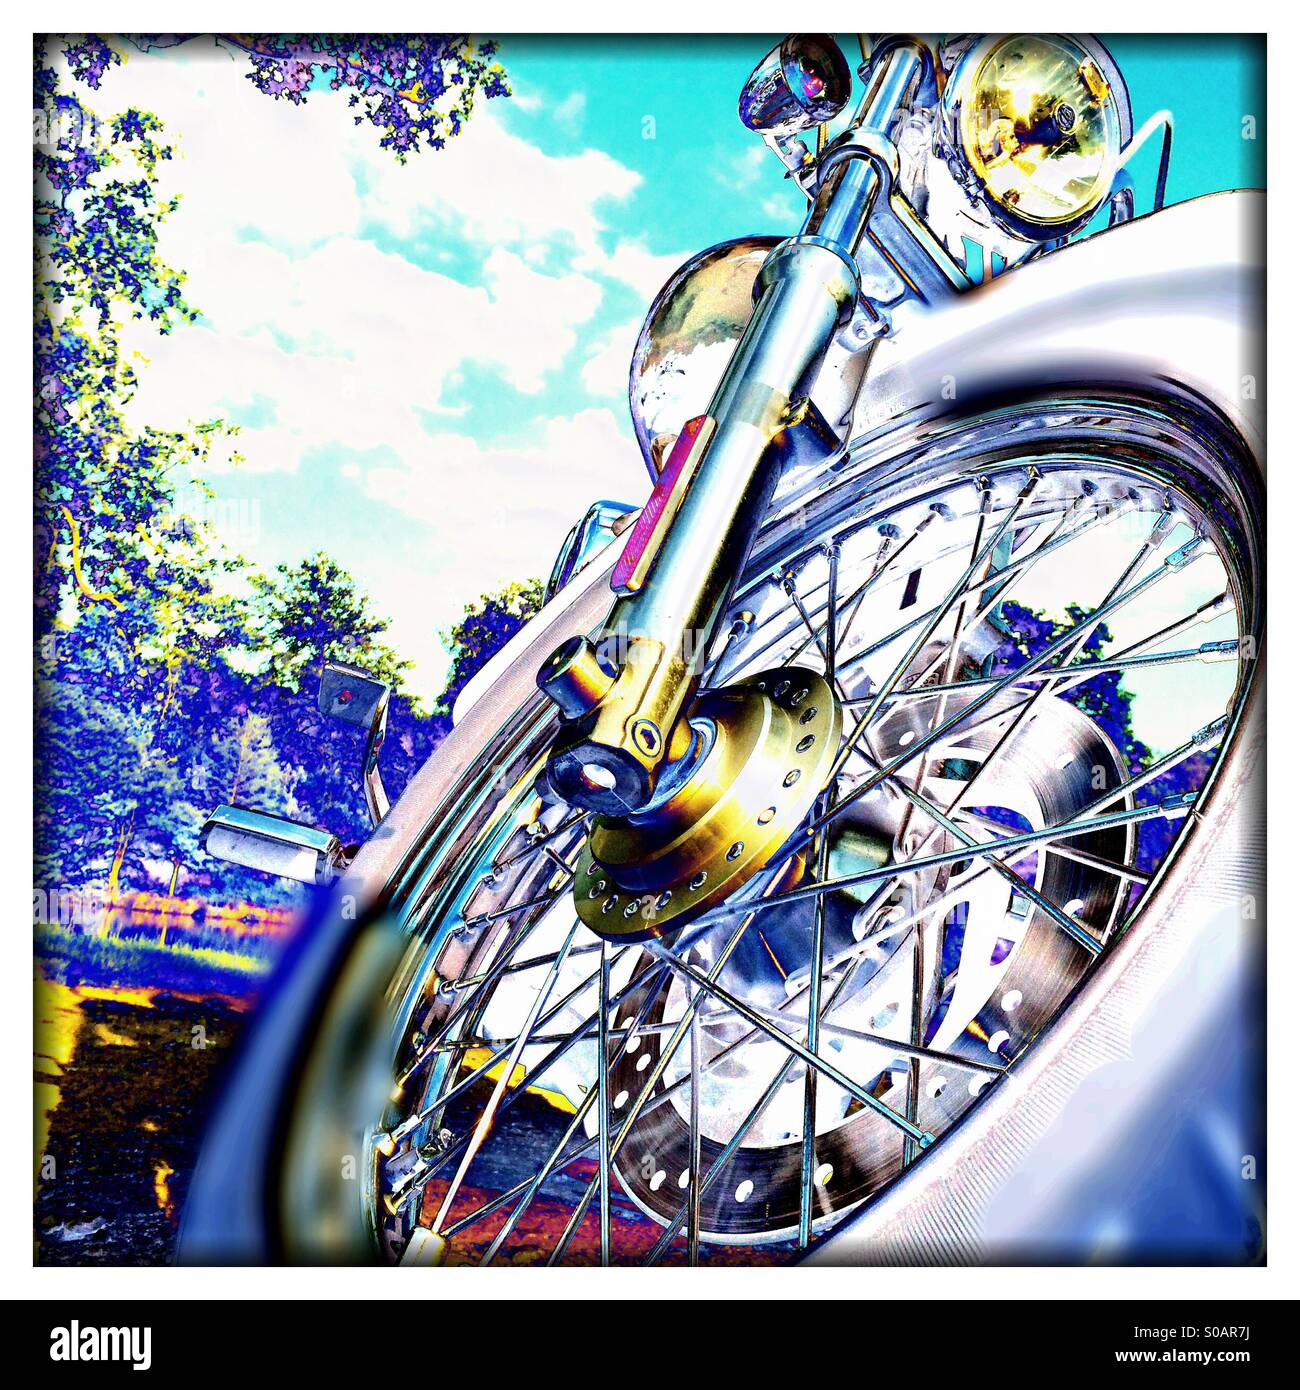 Digitally altered image showing front of chopper motorcycle in psychedelic colouring Stock Photo